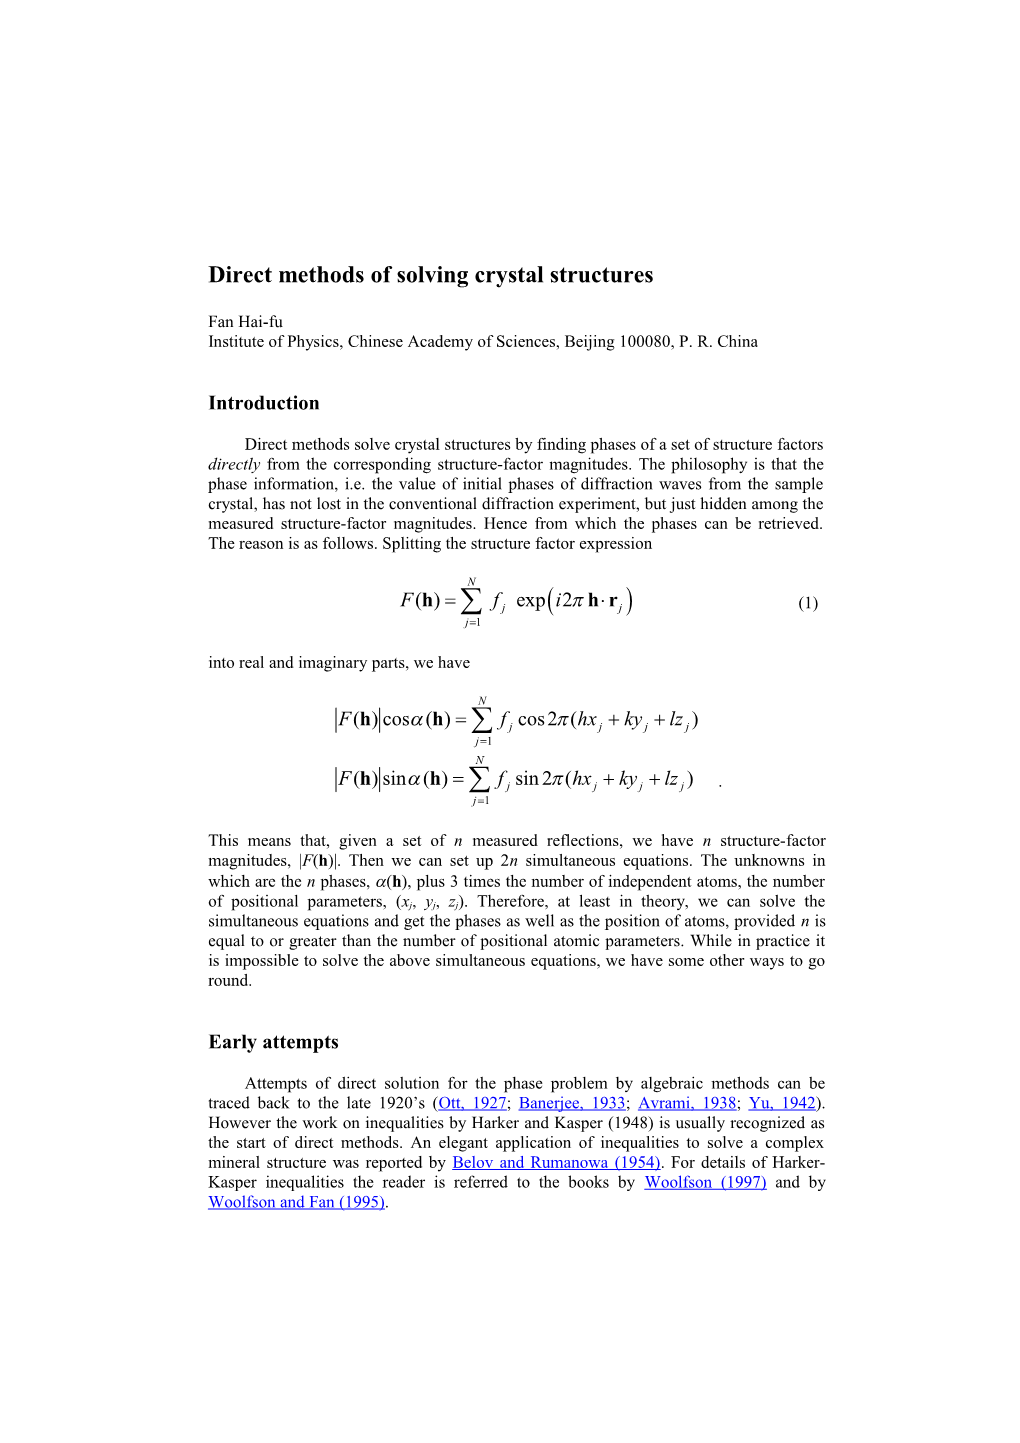 Direct Methods of Solving Crystal Structures